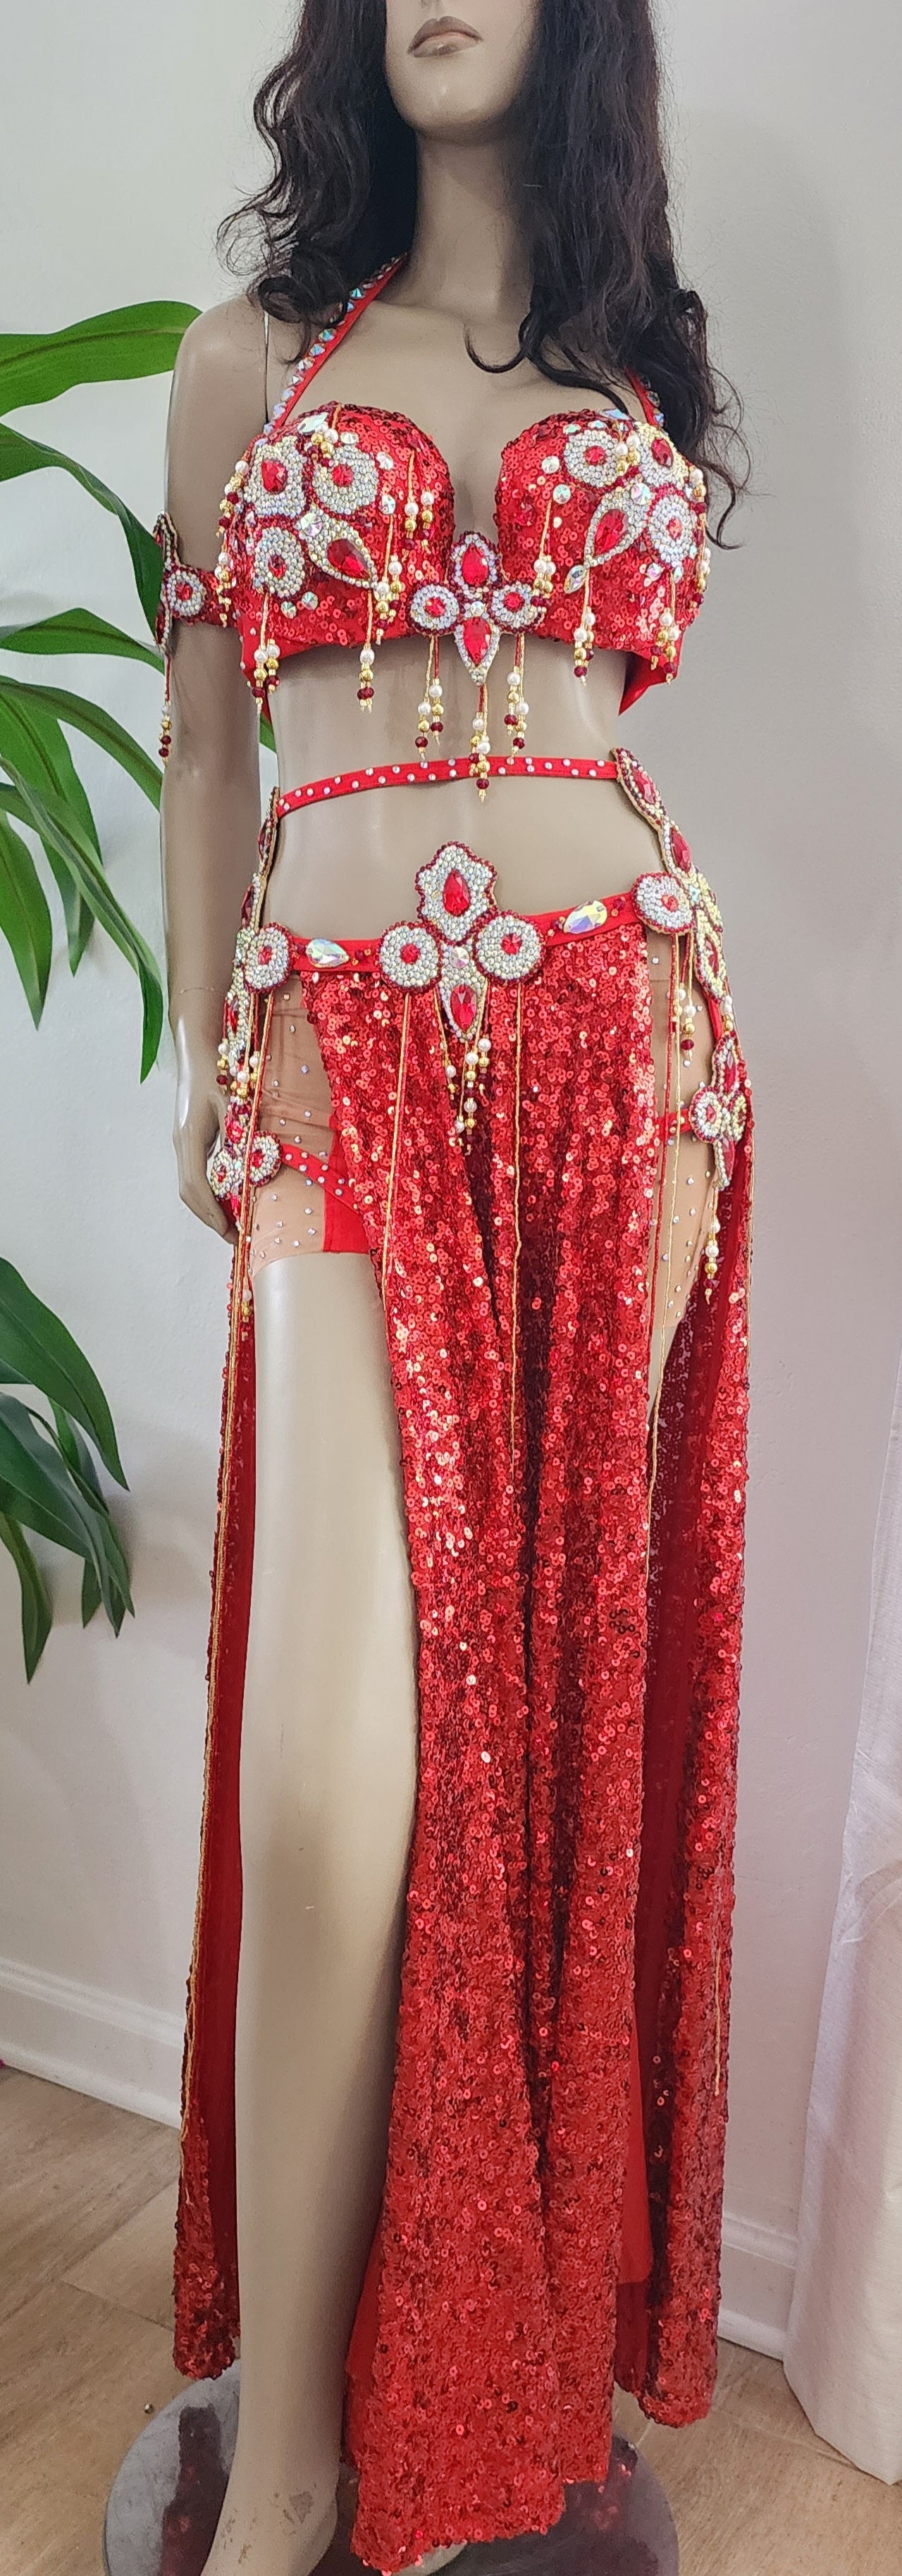 Belly Dance Basics Accessory Kit in Red